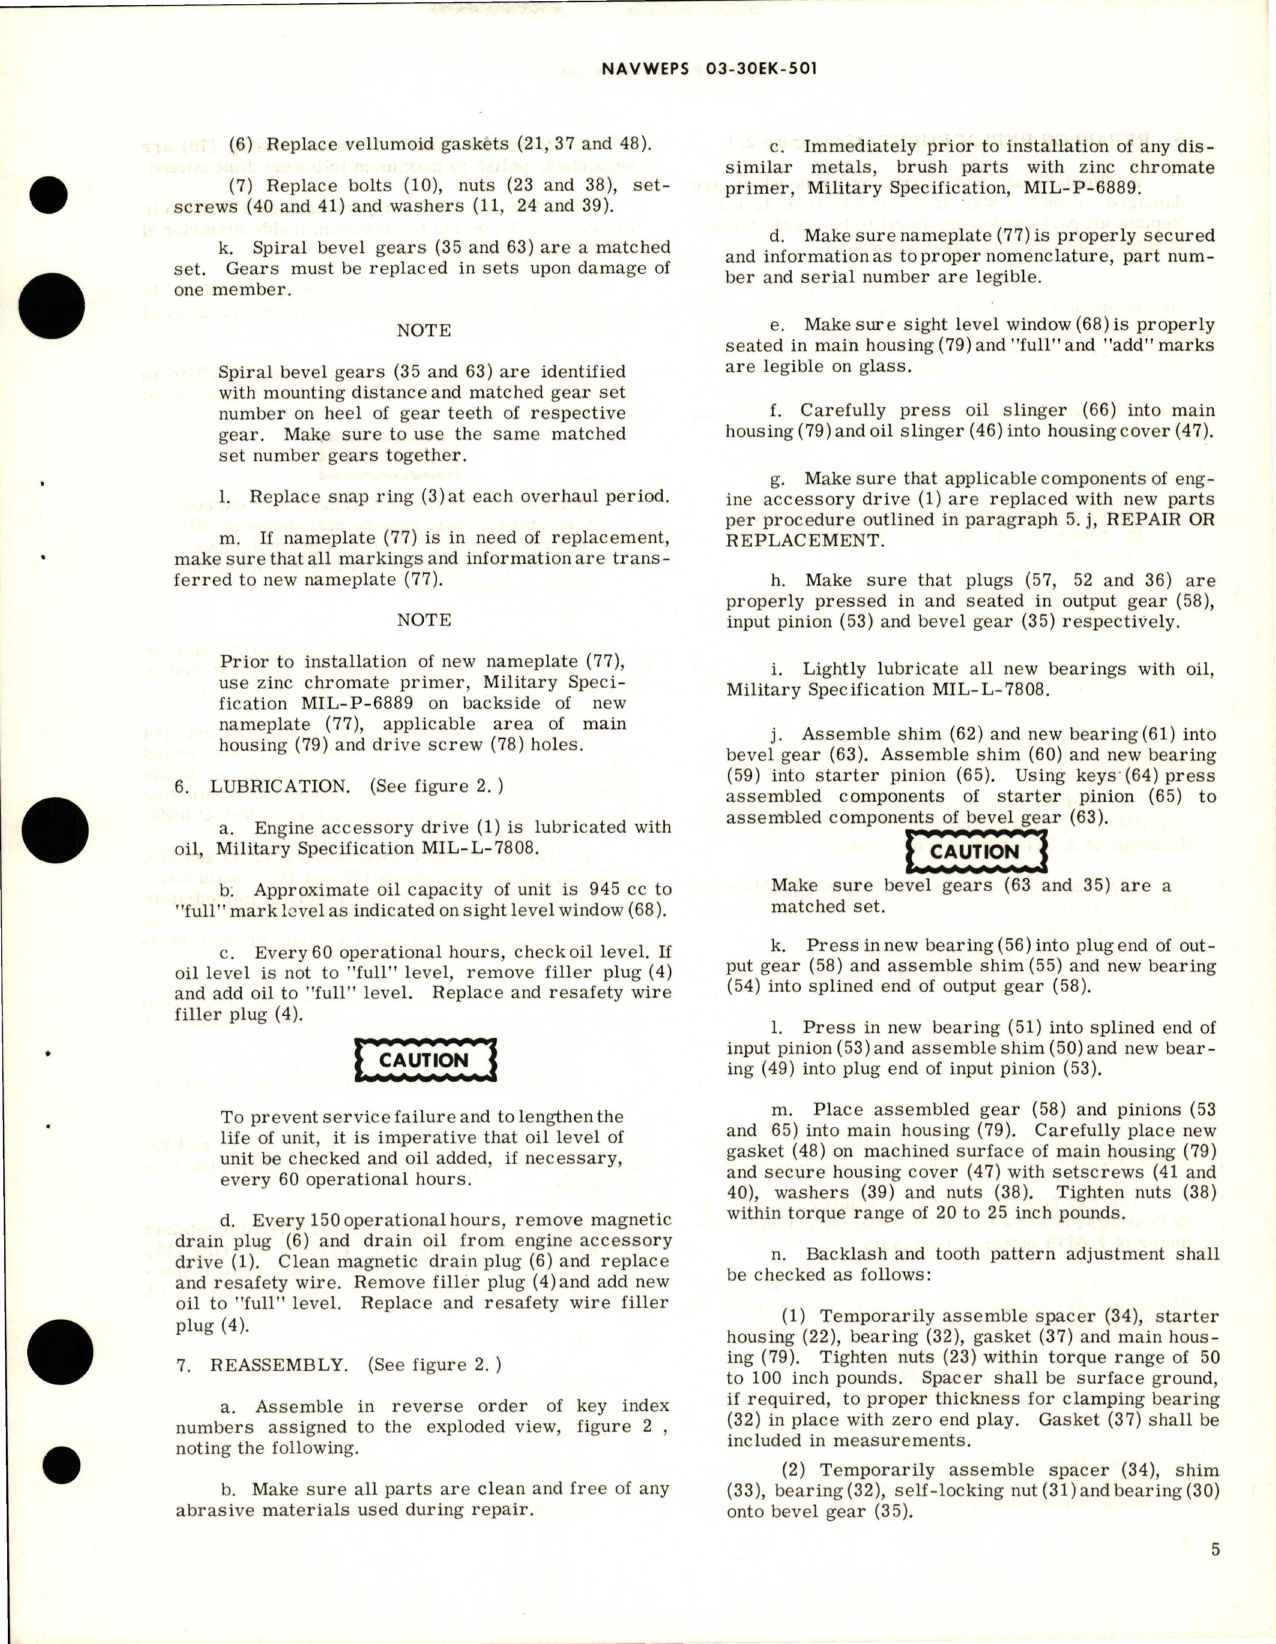 Sample page 7 from AirCorps Library document: Overhaul Instructions with Parts Breakdown for Engine Accessory Drive - Part 1755R1 and 1755R71